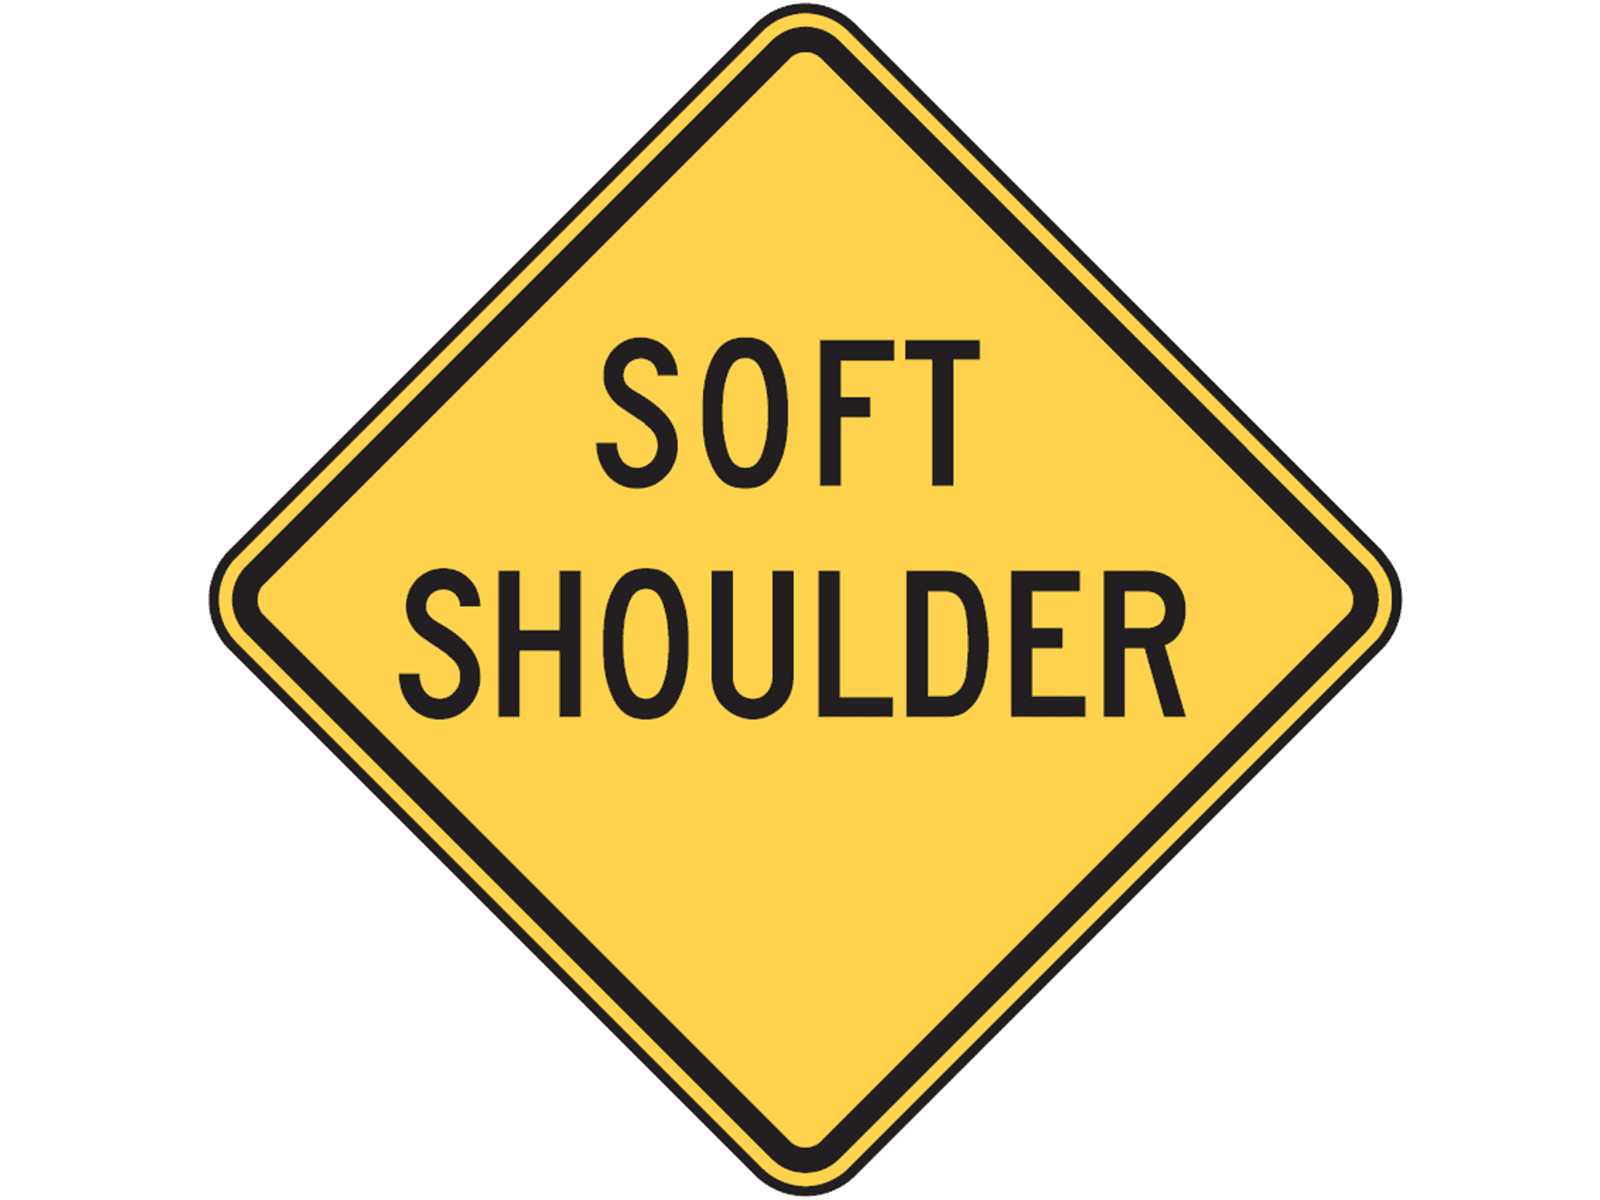 Soft Shoulder W8-4 - W8: Pavement and Roadway Conditions